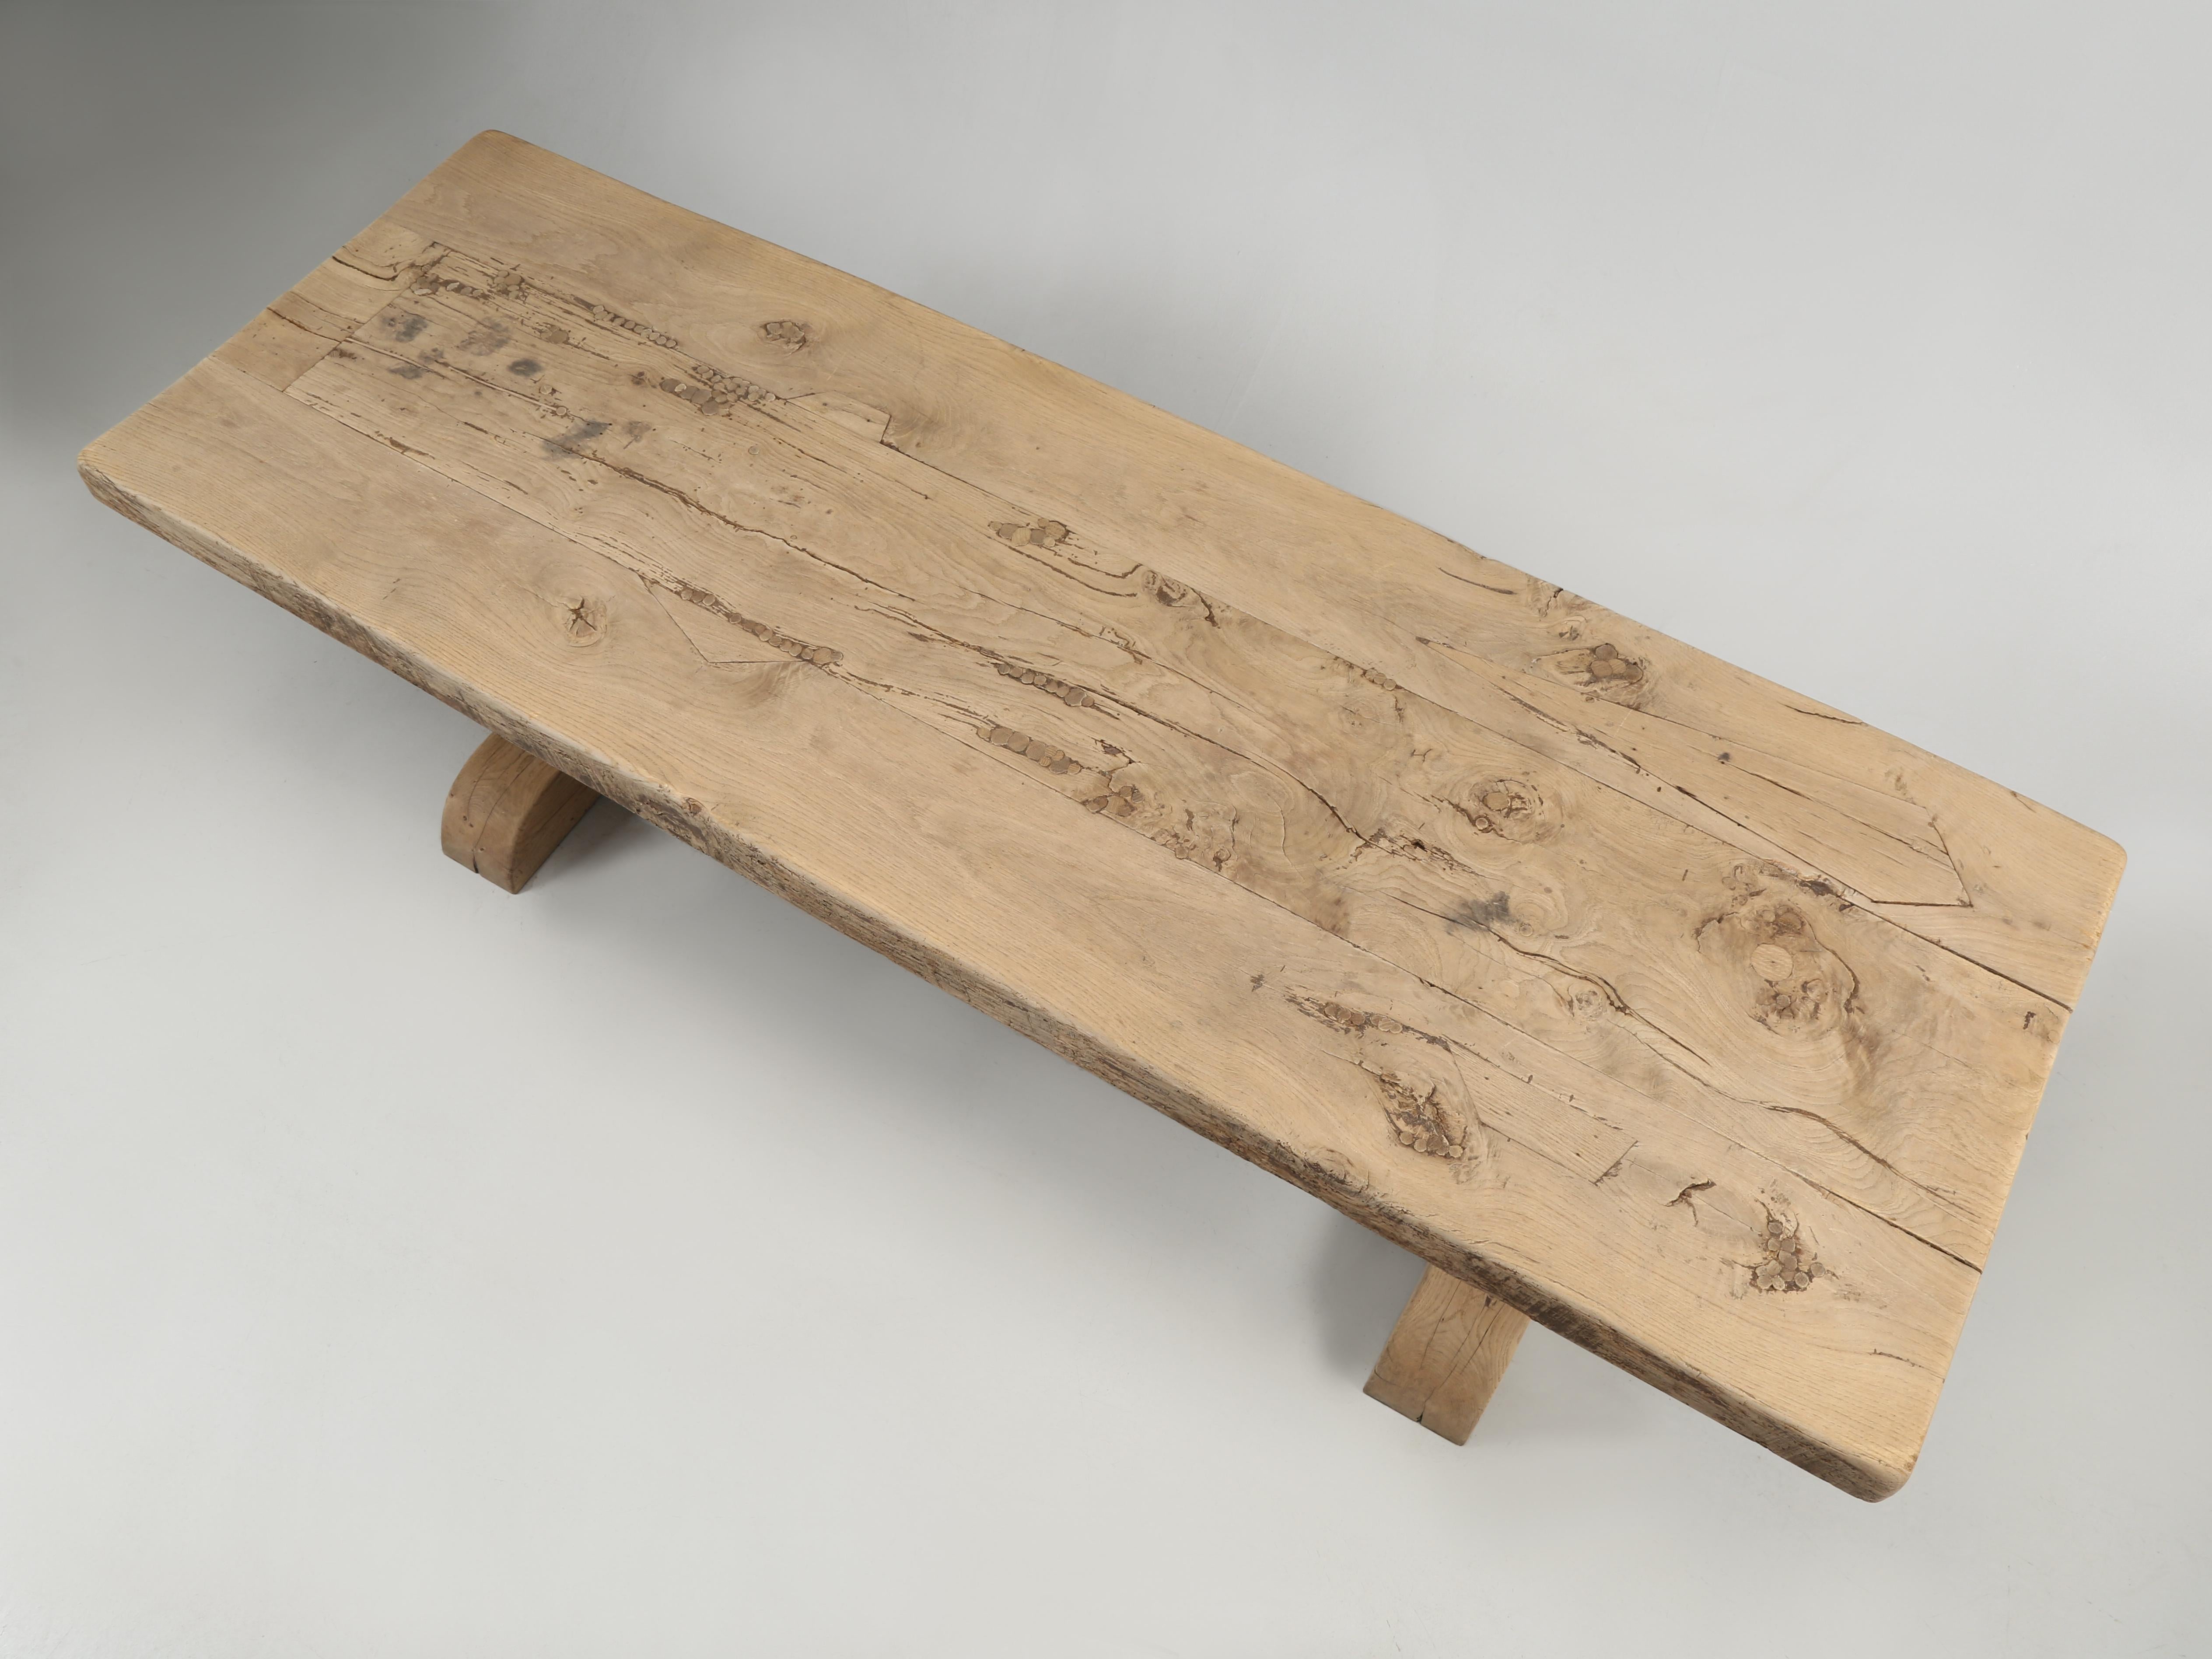 Antique French Trestle style farm table. One of the items that we at Old Plank specialize in, are antique and inhouse built exact copies of old French farm tables and have been constructing them for over 30-years. So, whenever something really